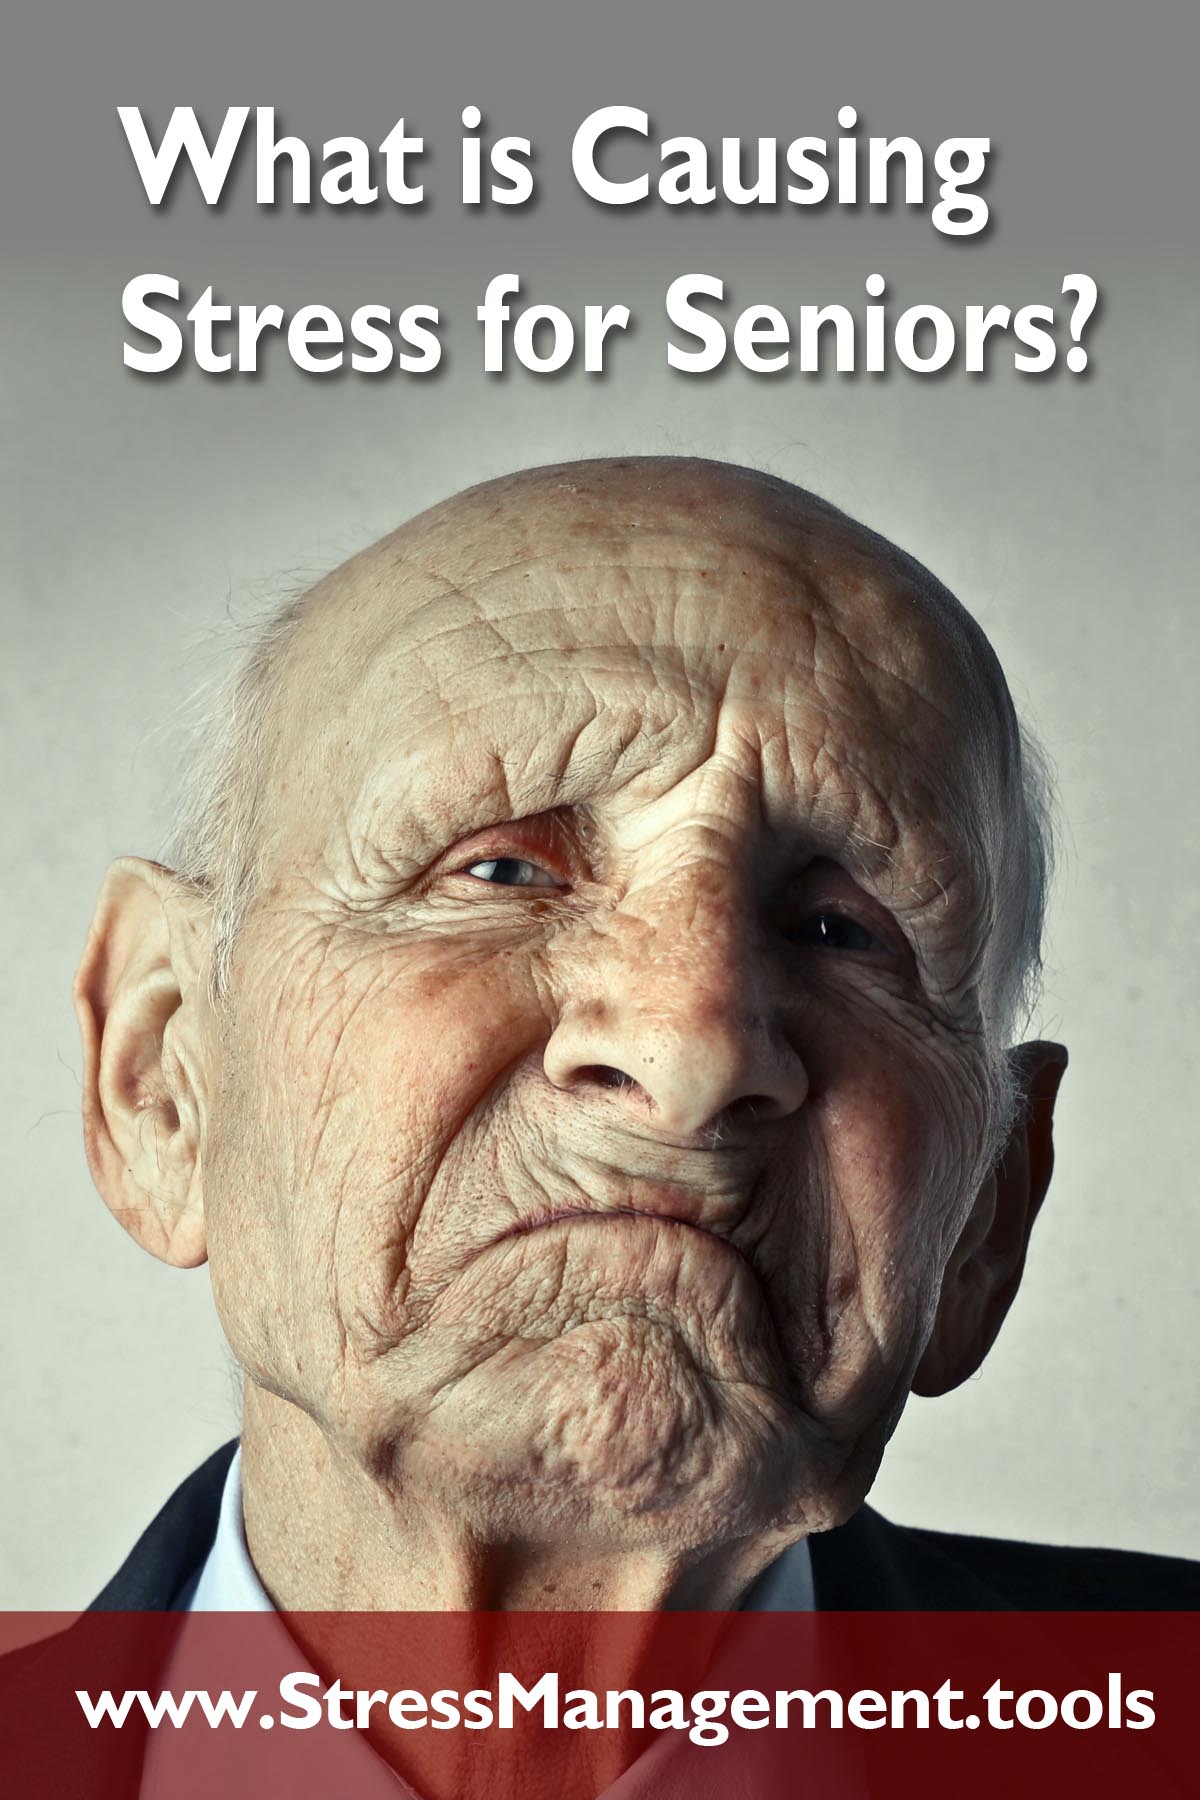 What is Causing Stress for Seniors?